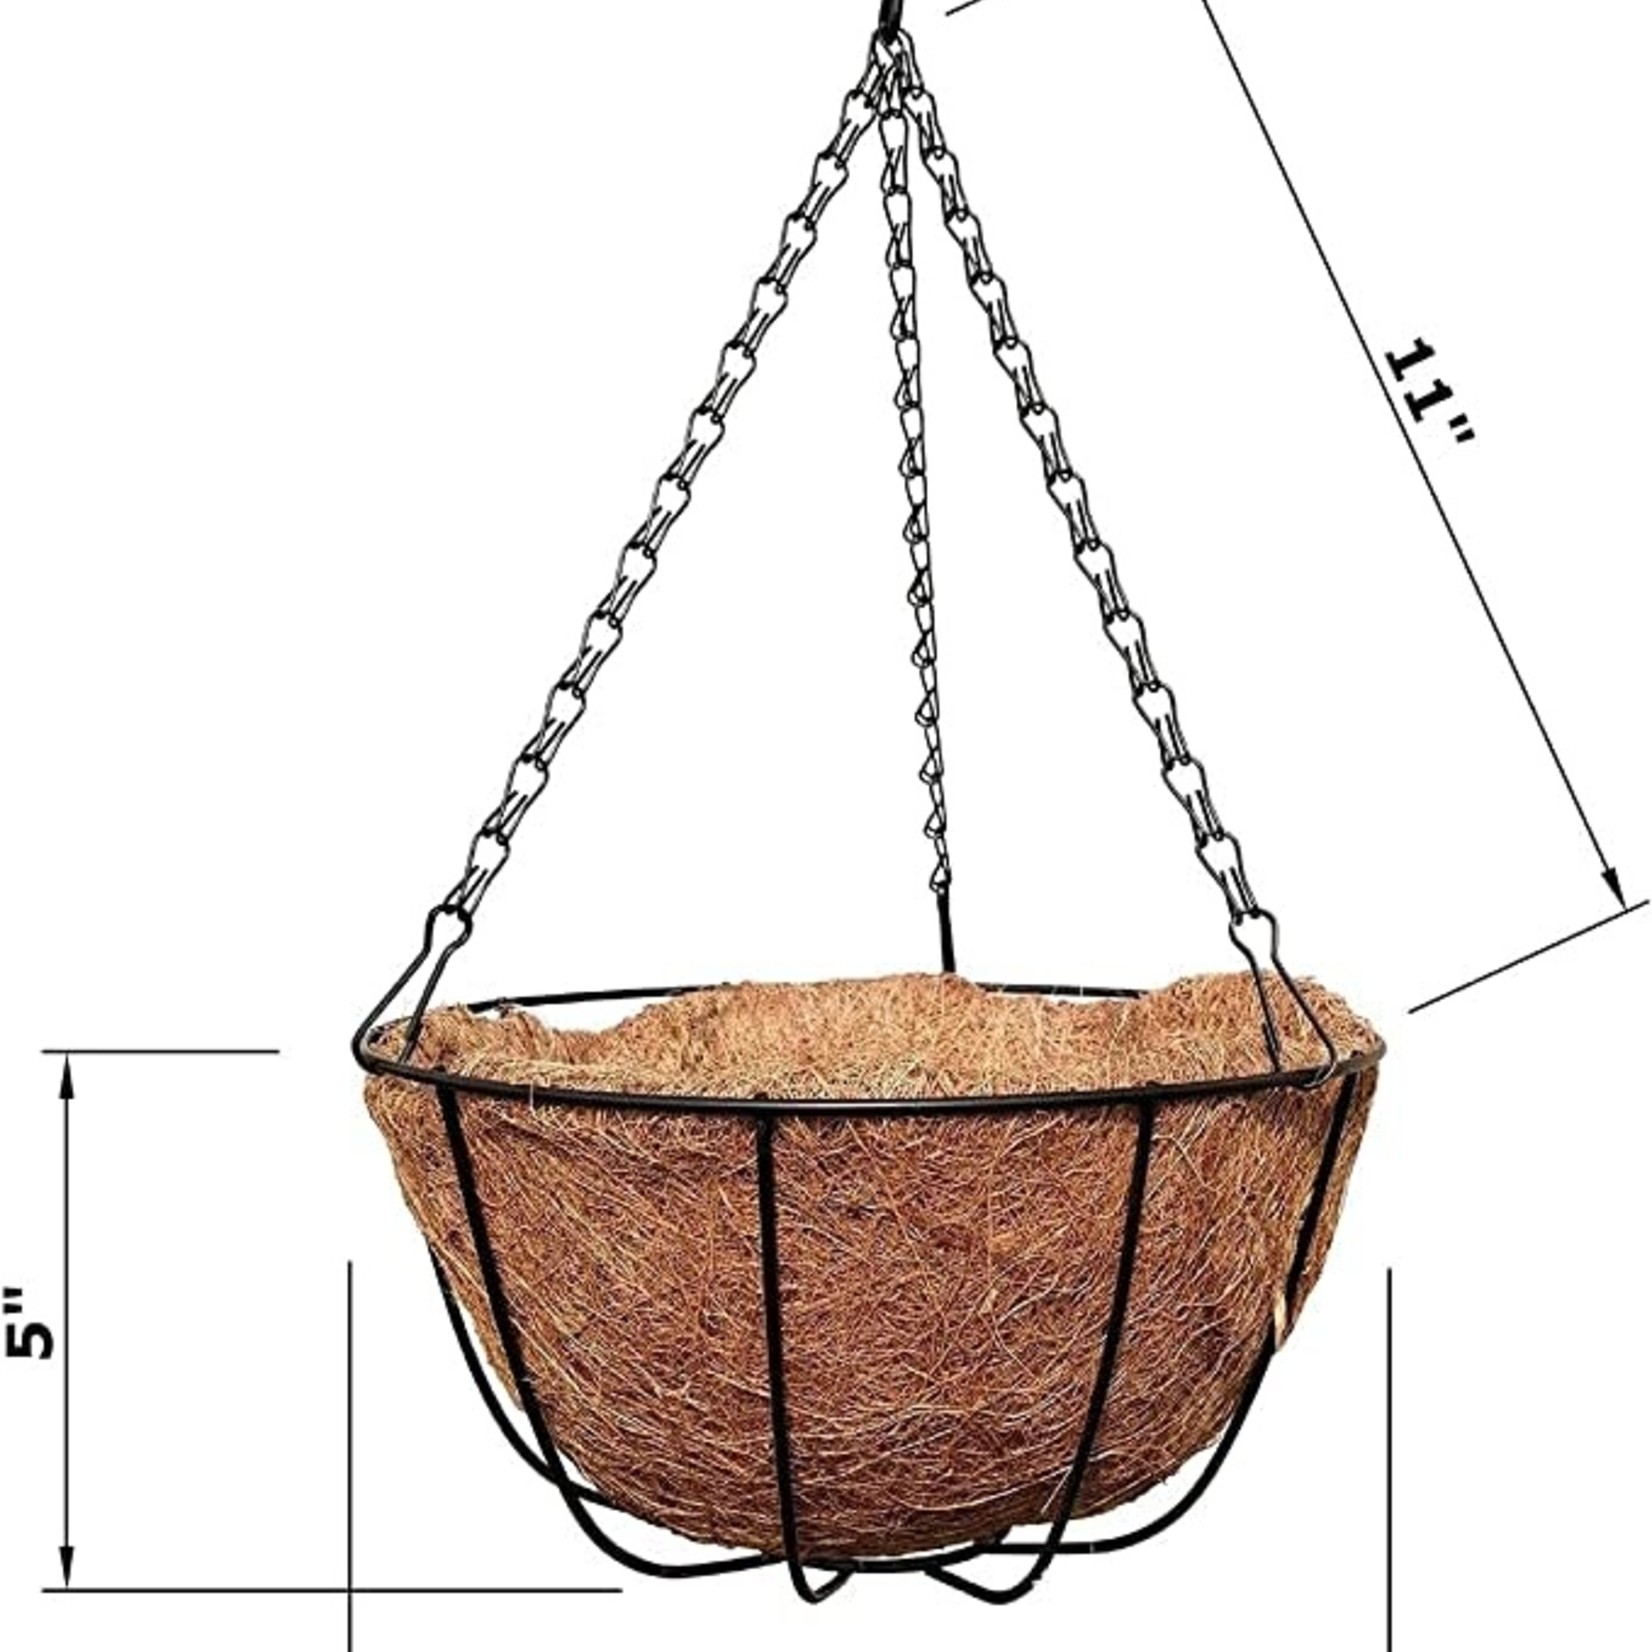 Mtb Supply Inc Garden Hanging Baskets- 10 Inches- Set Of 4